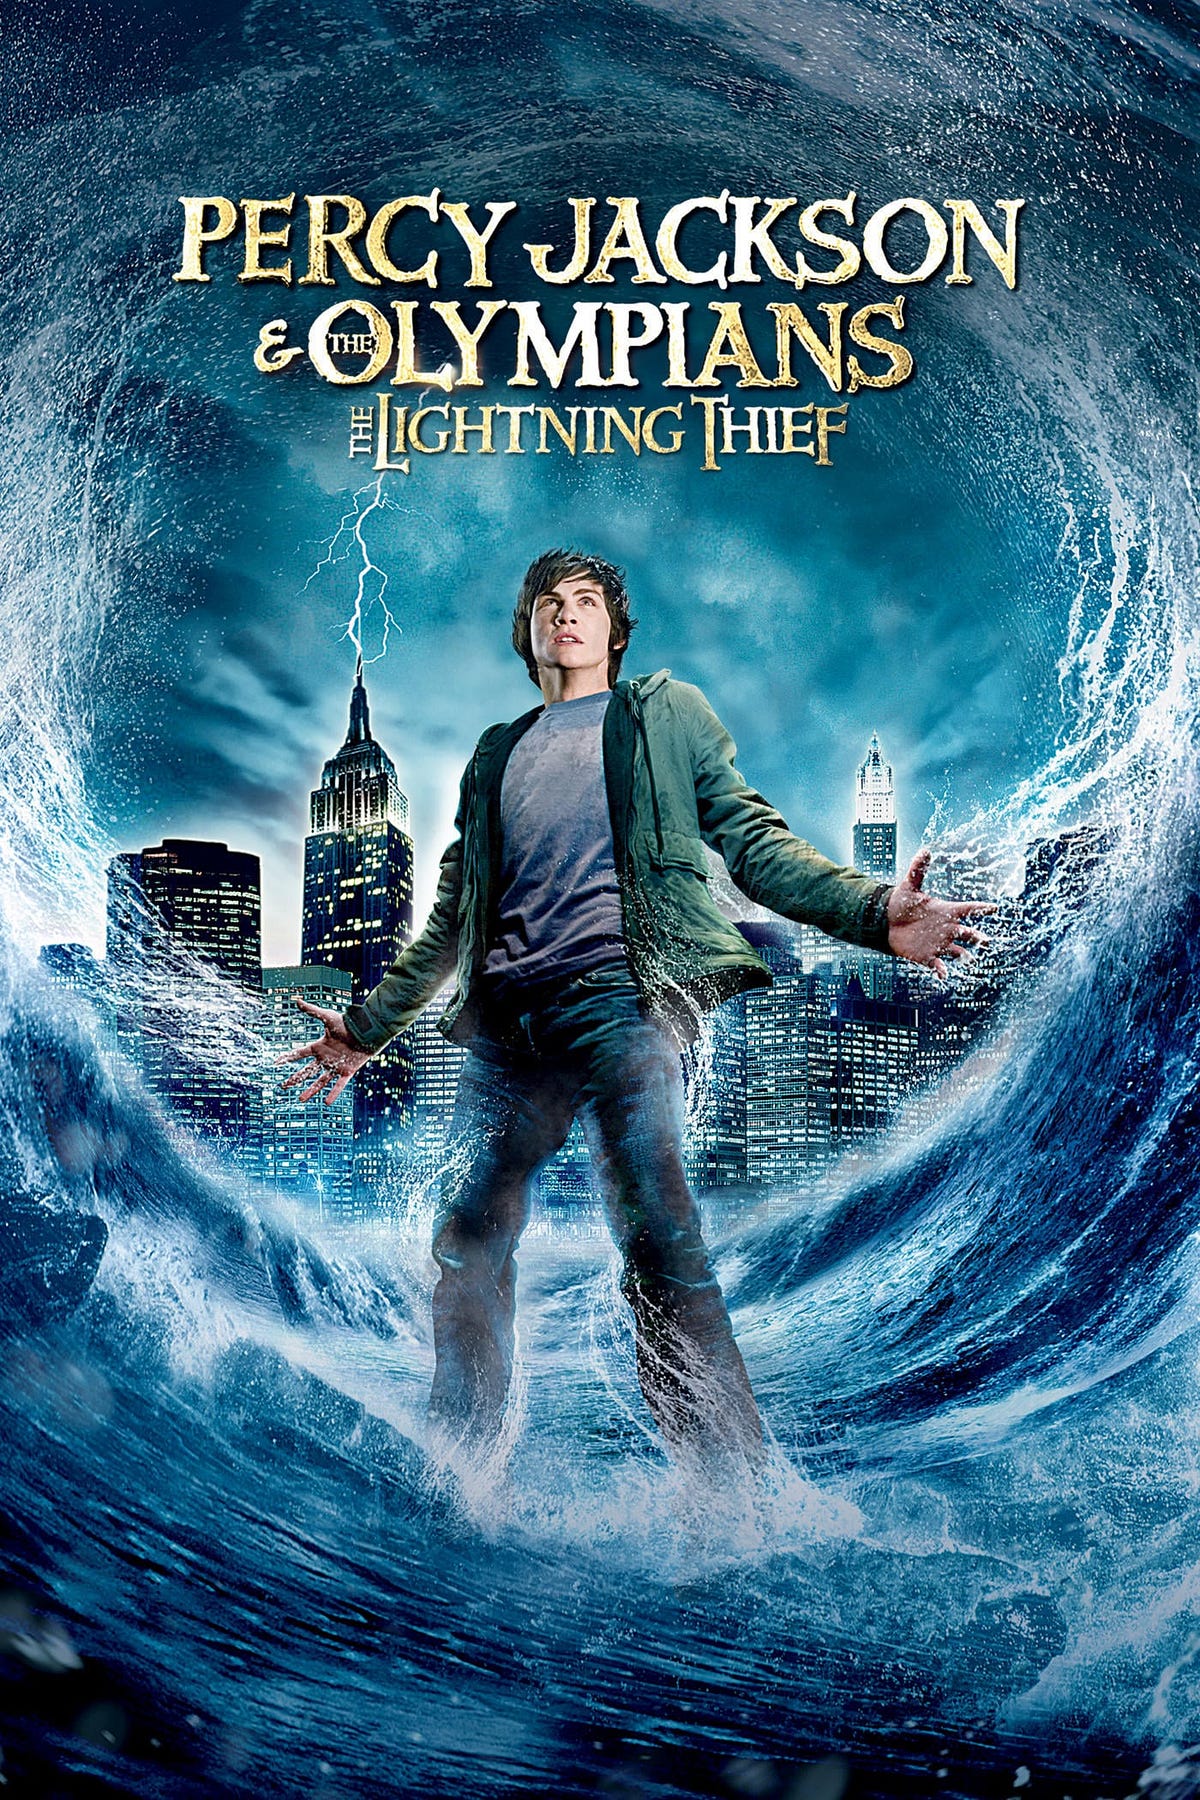 Remediating Percy Jackson – A Quest of Our Own (Group 8) – New Media:  Storytelling in Literature, Films, and Games